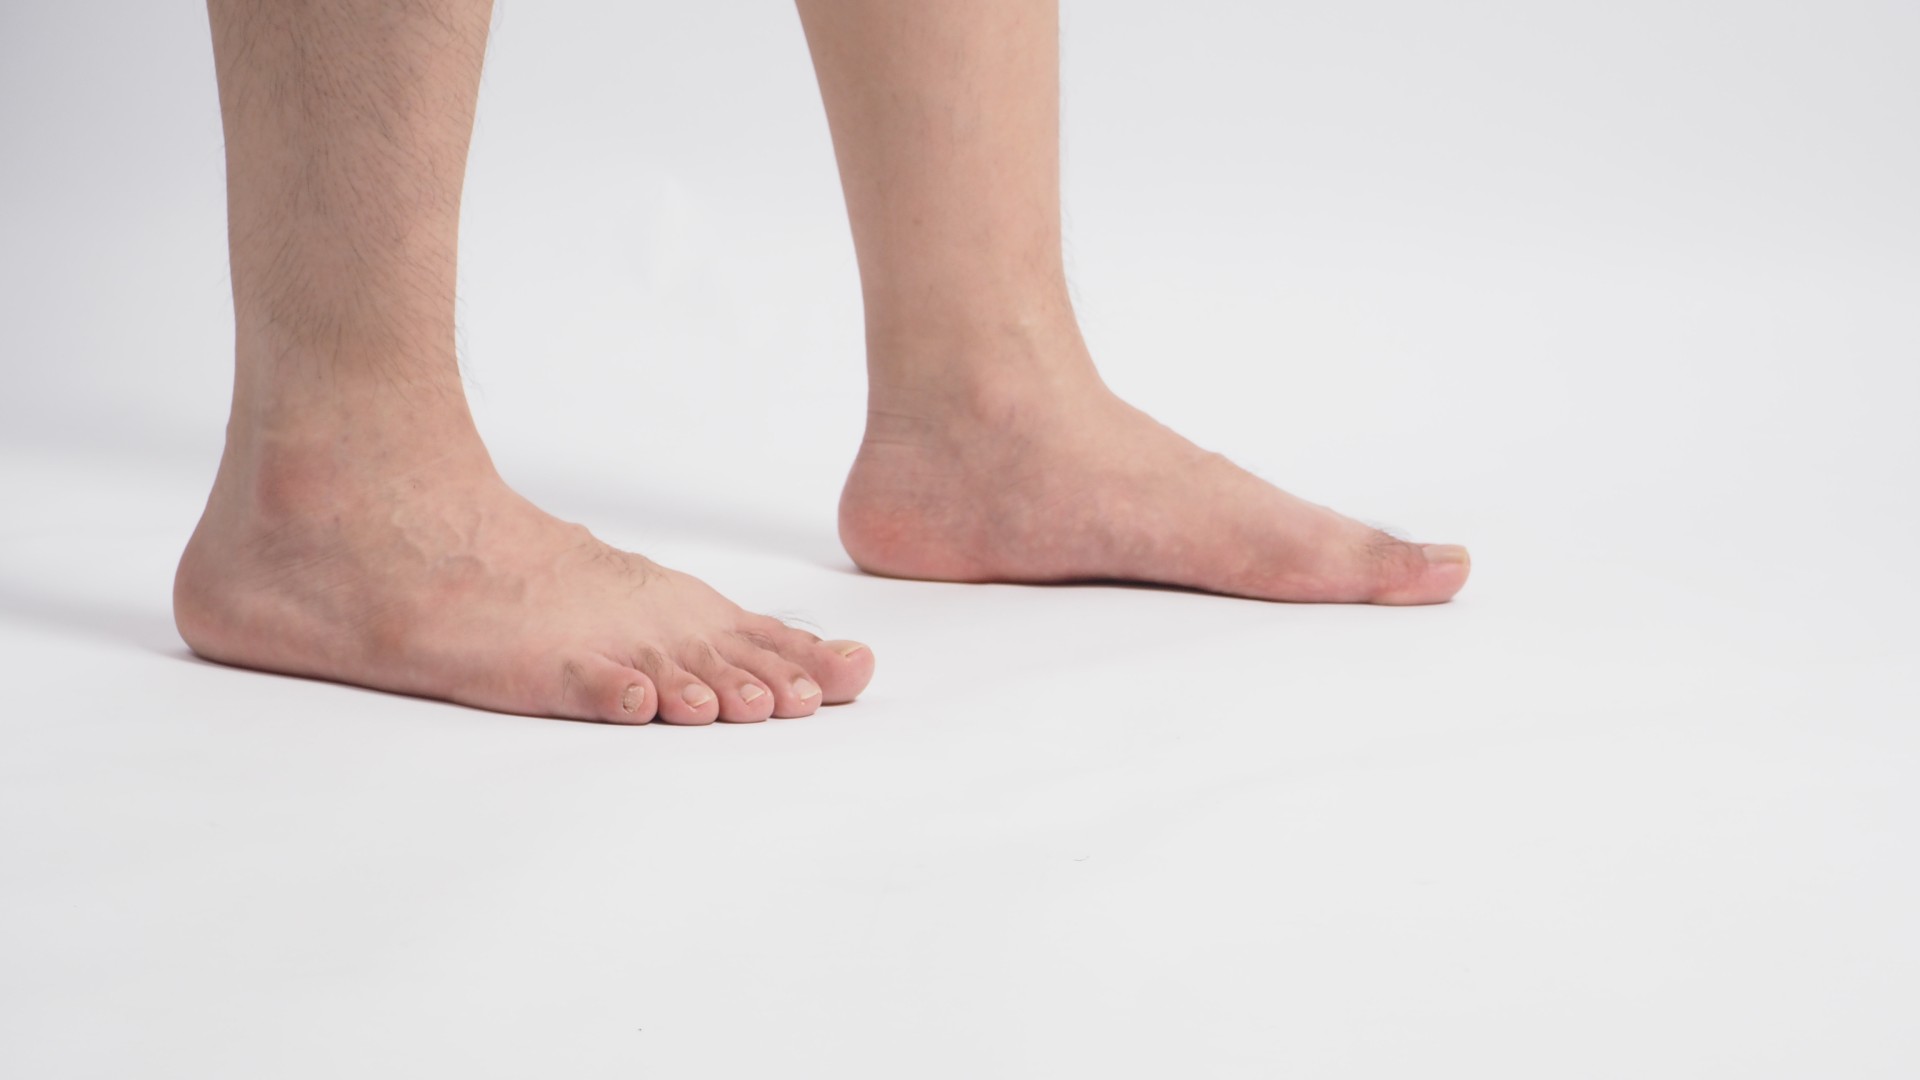 a close up of a person's feet who has a flat foot condition